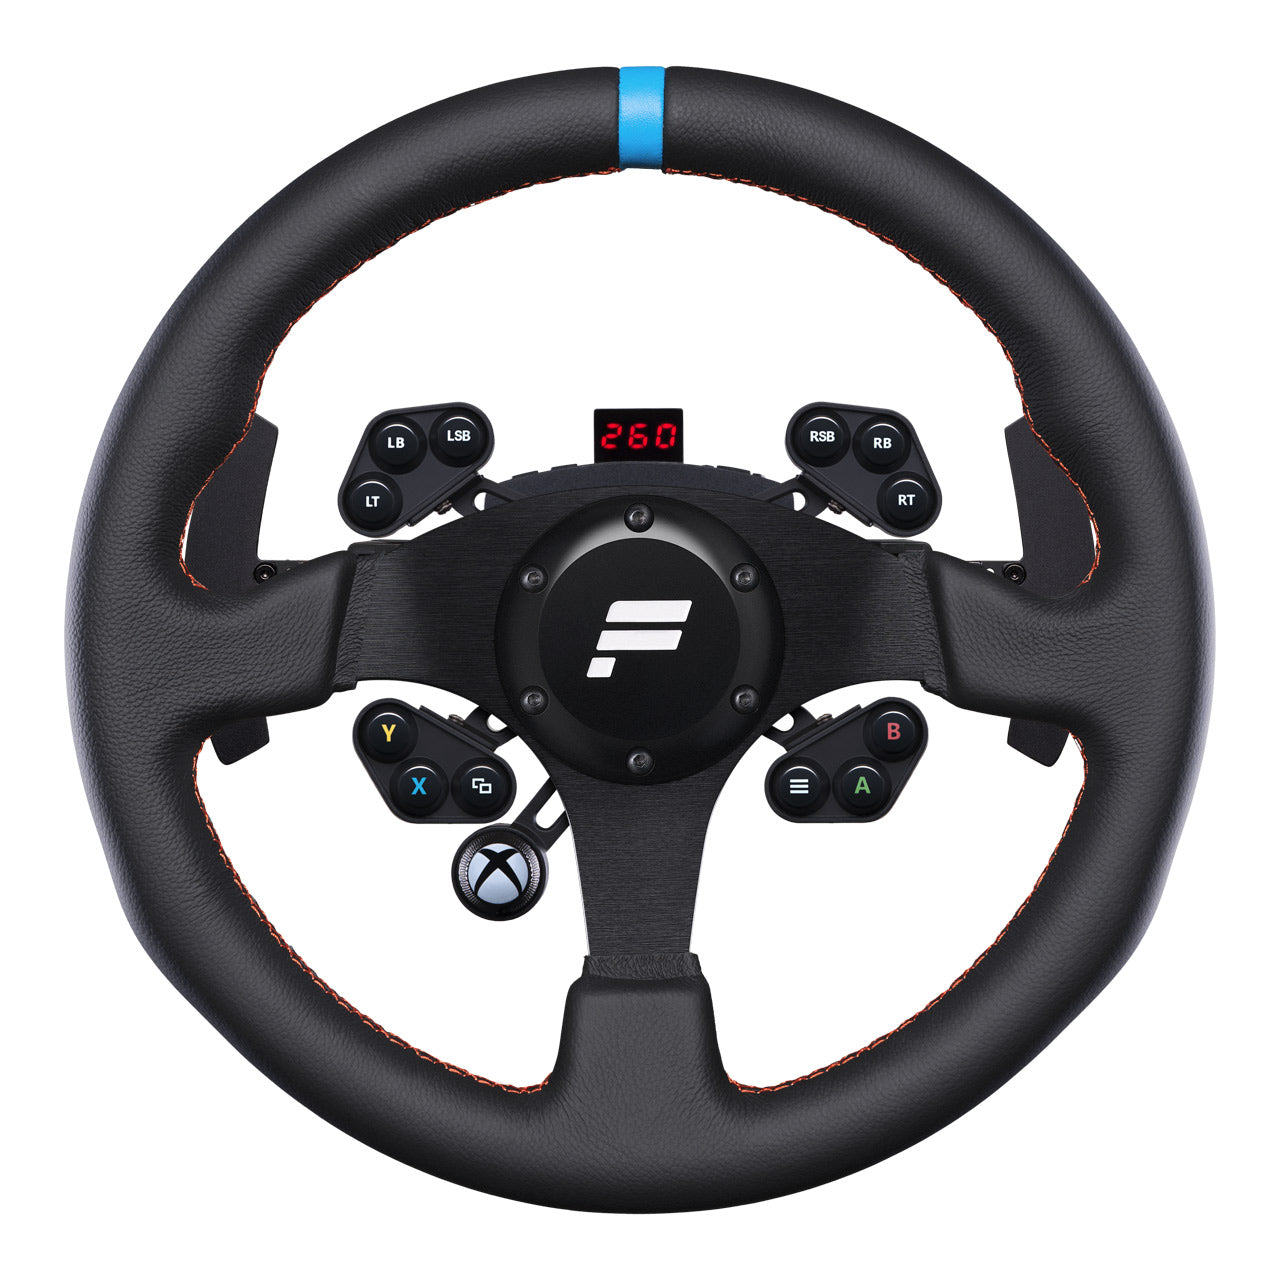 Fanatec ClubSport Steering Wheel R330 V2 for Xbox Complete